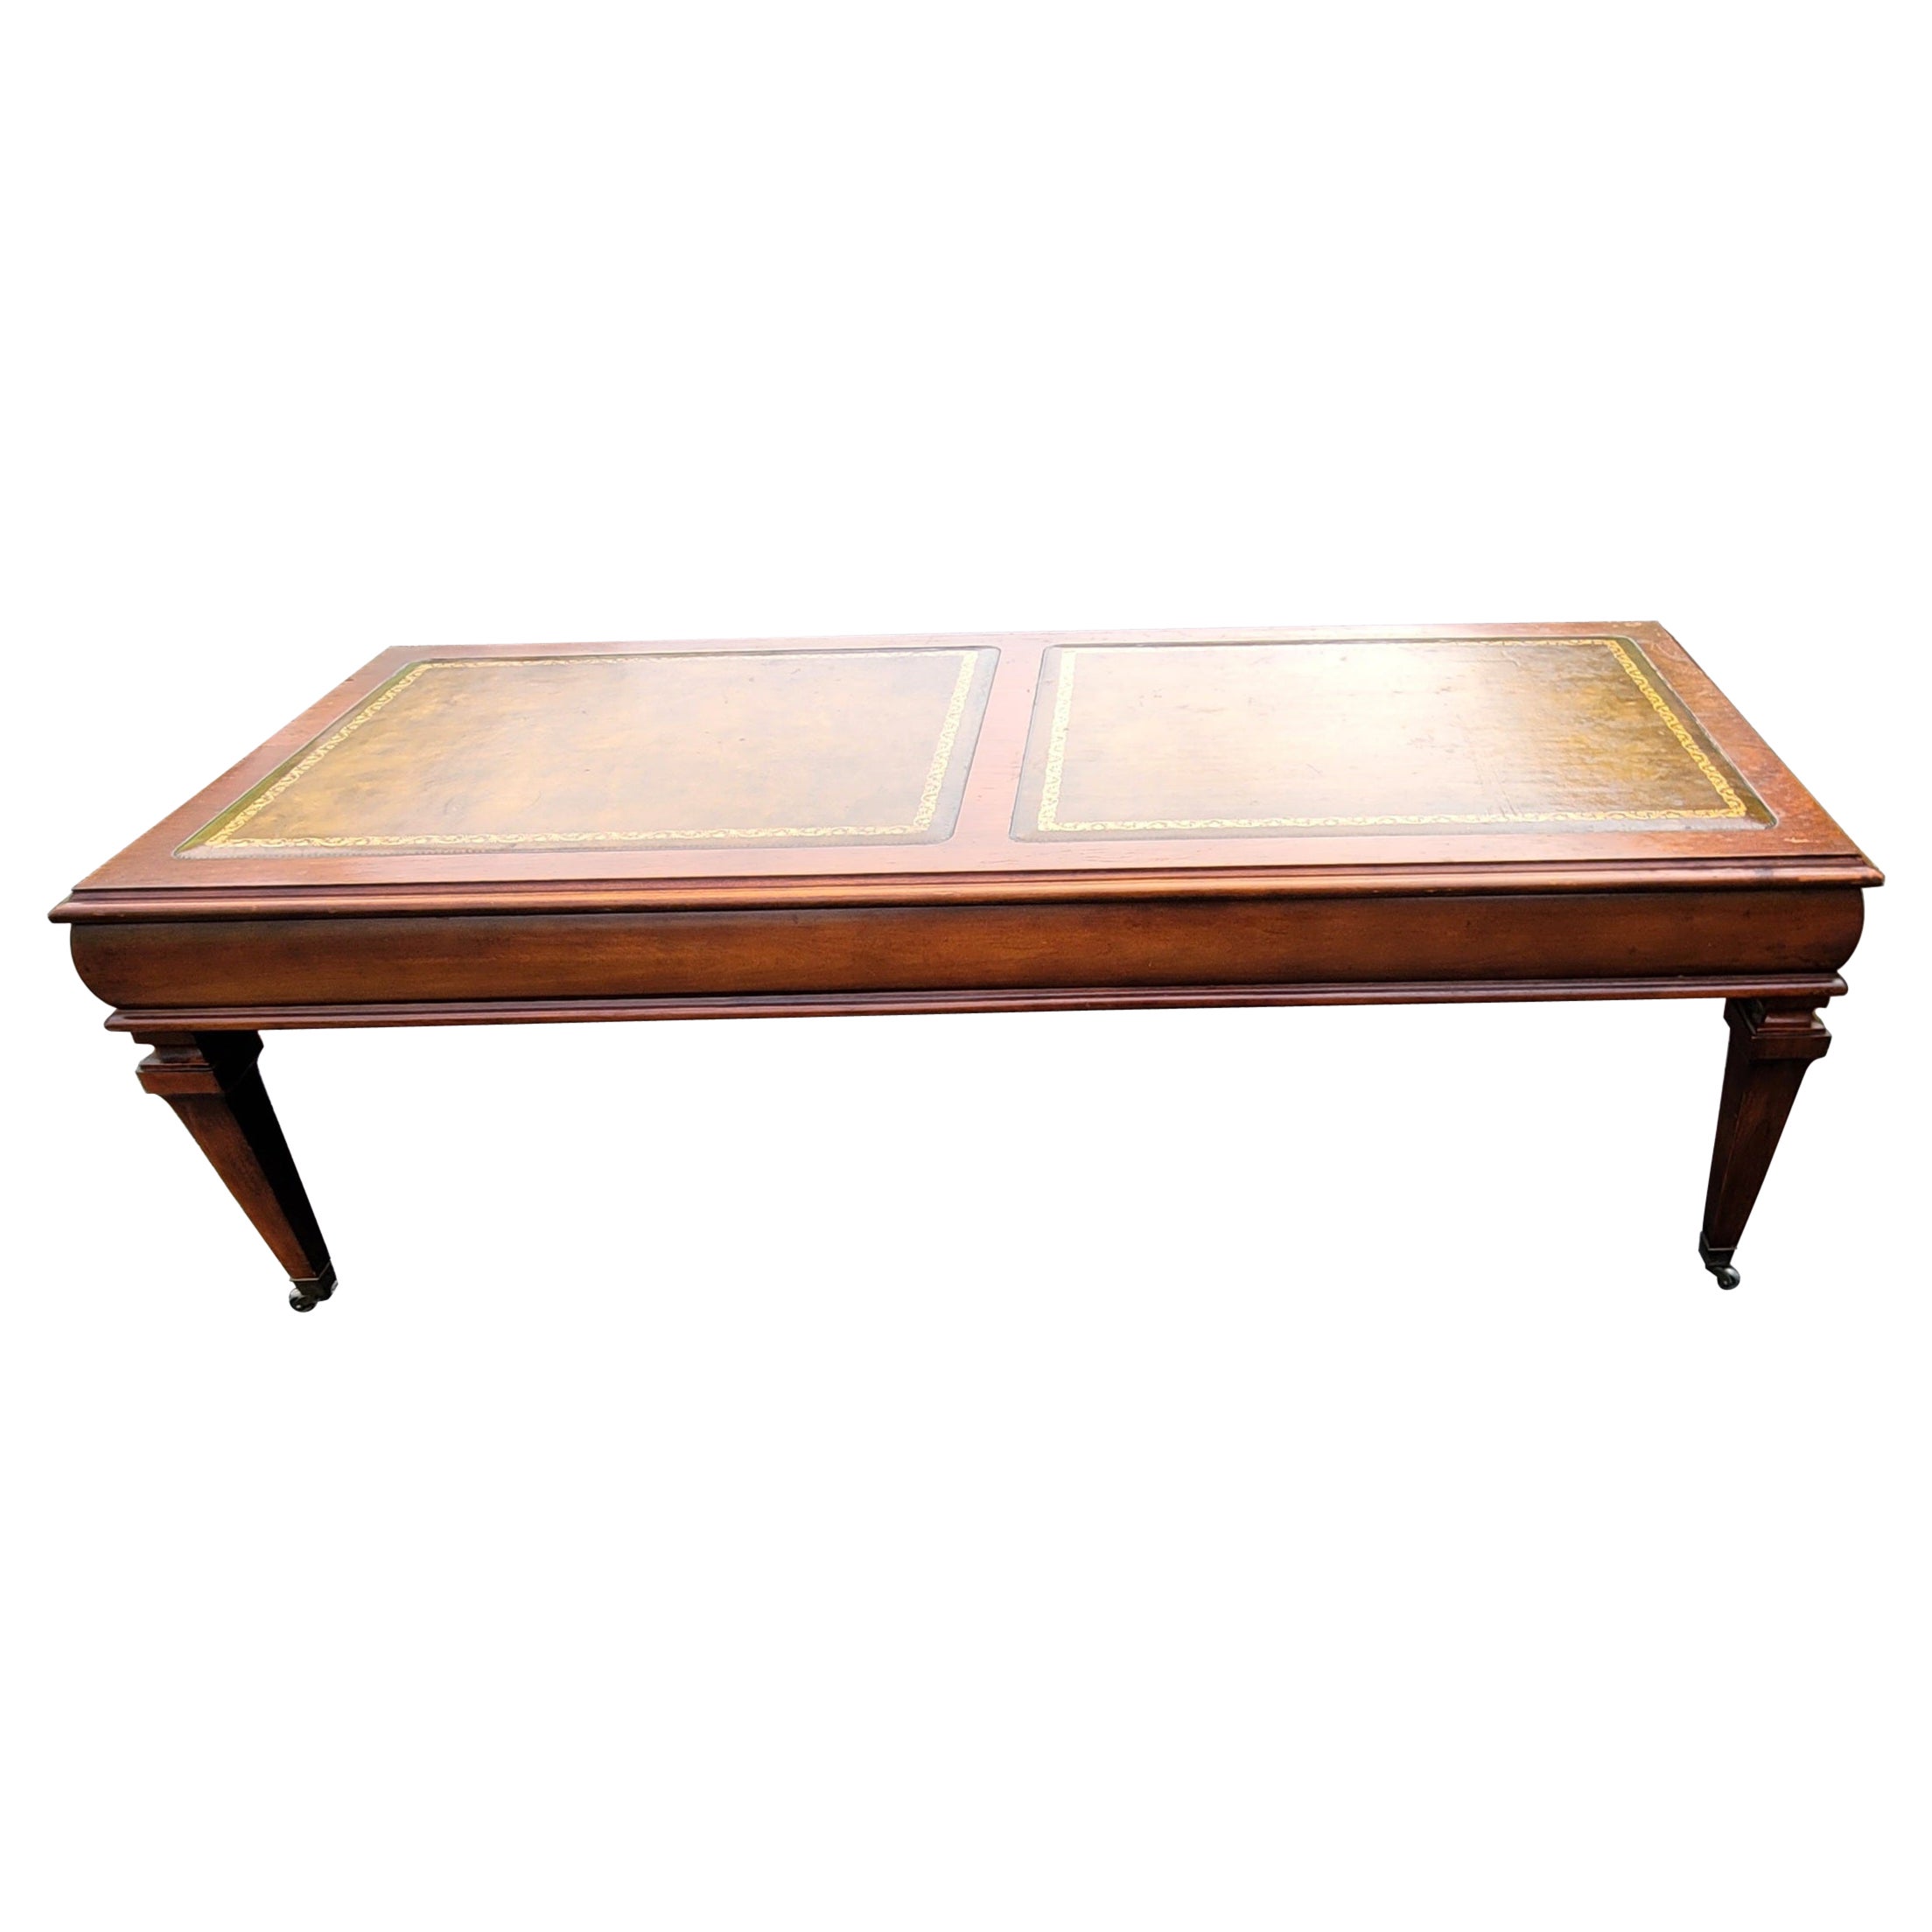 1961 Mahogany and Stenciled Tooled Leather Paneled Top Cocktail Table For Sale